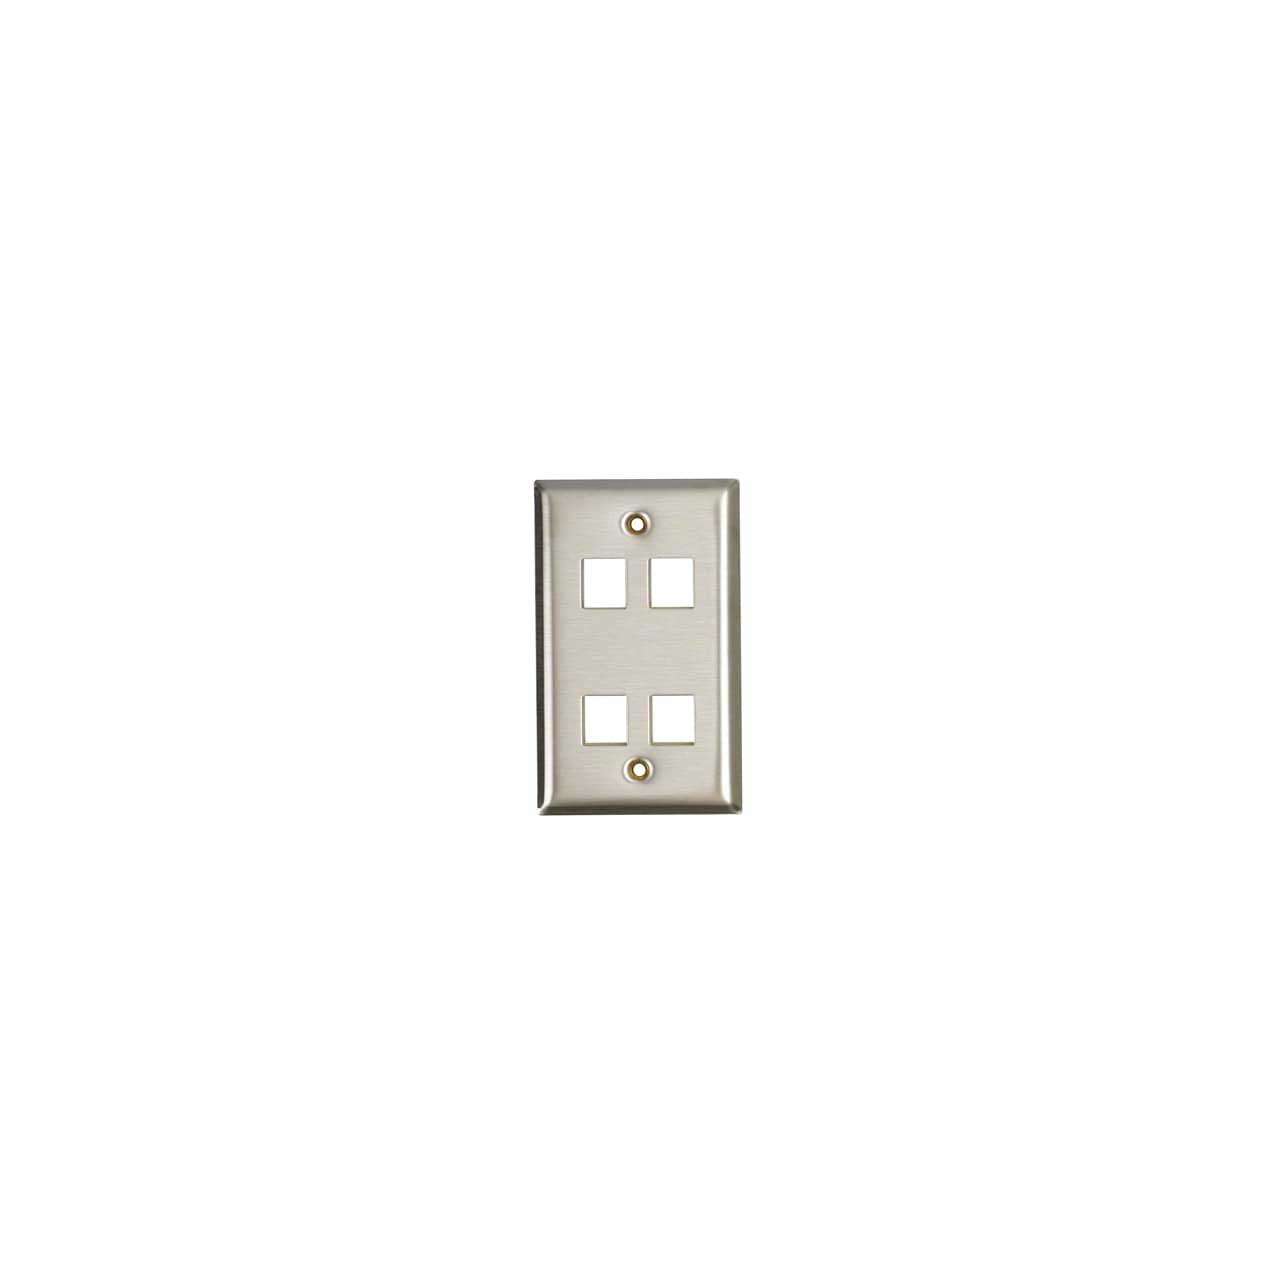 Belden AX102009 KeyConnect Stainless Steel 4-Port Single-Gang Faceplate